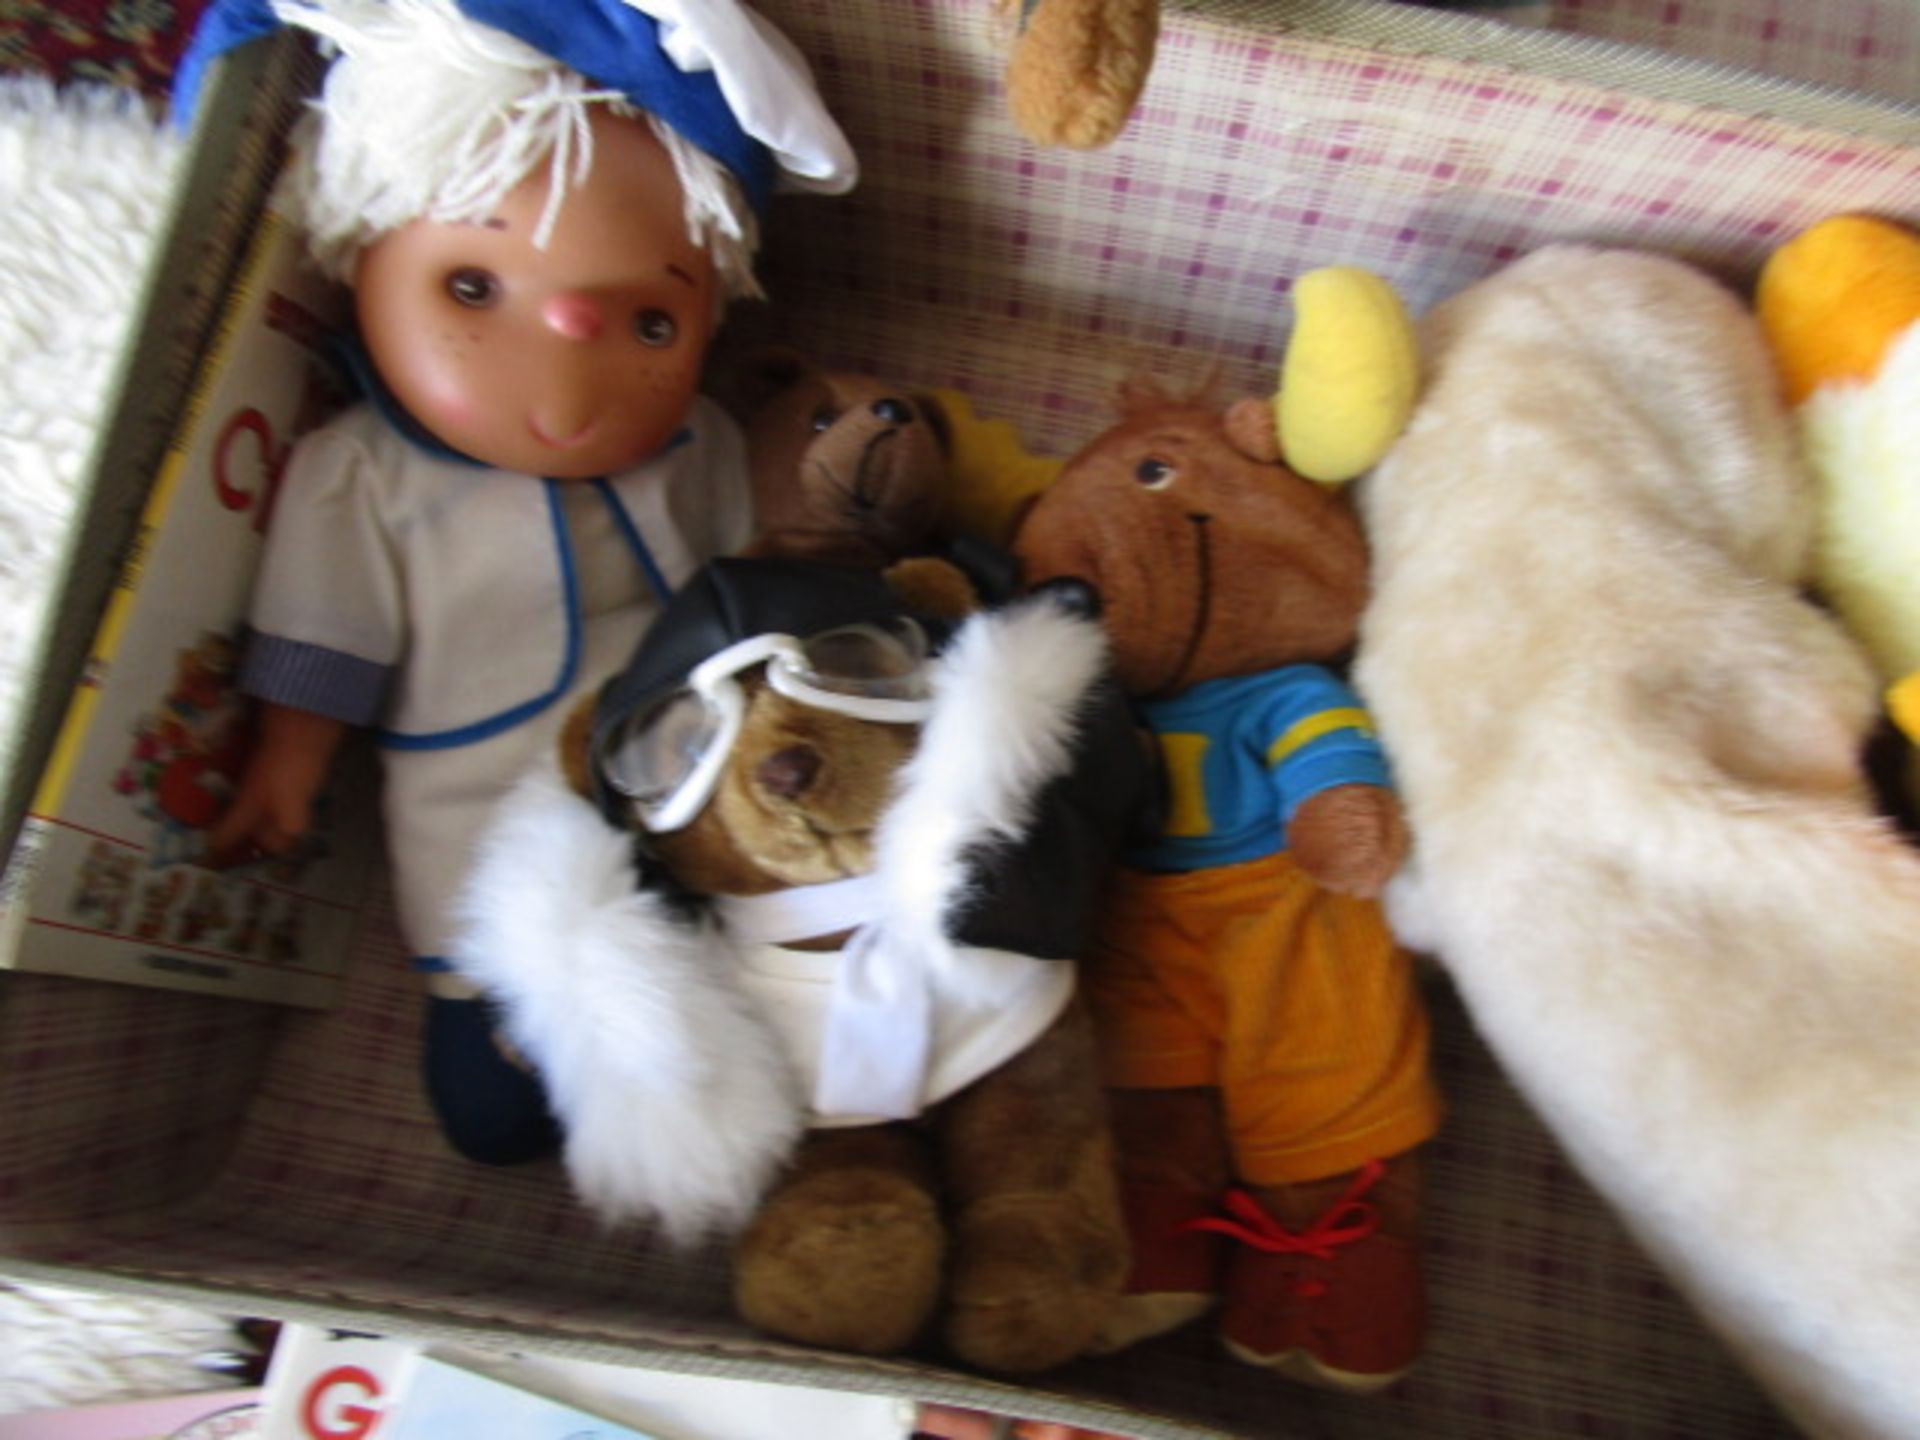 vintage teddies and a Noddy rug in a suitcase - Image 3 of 4